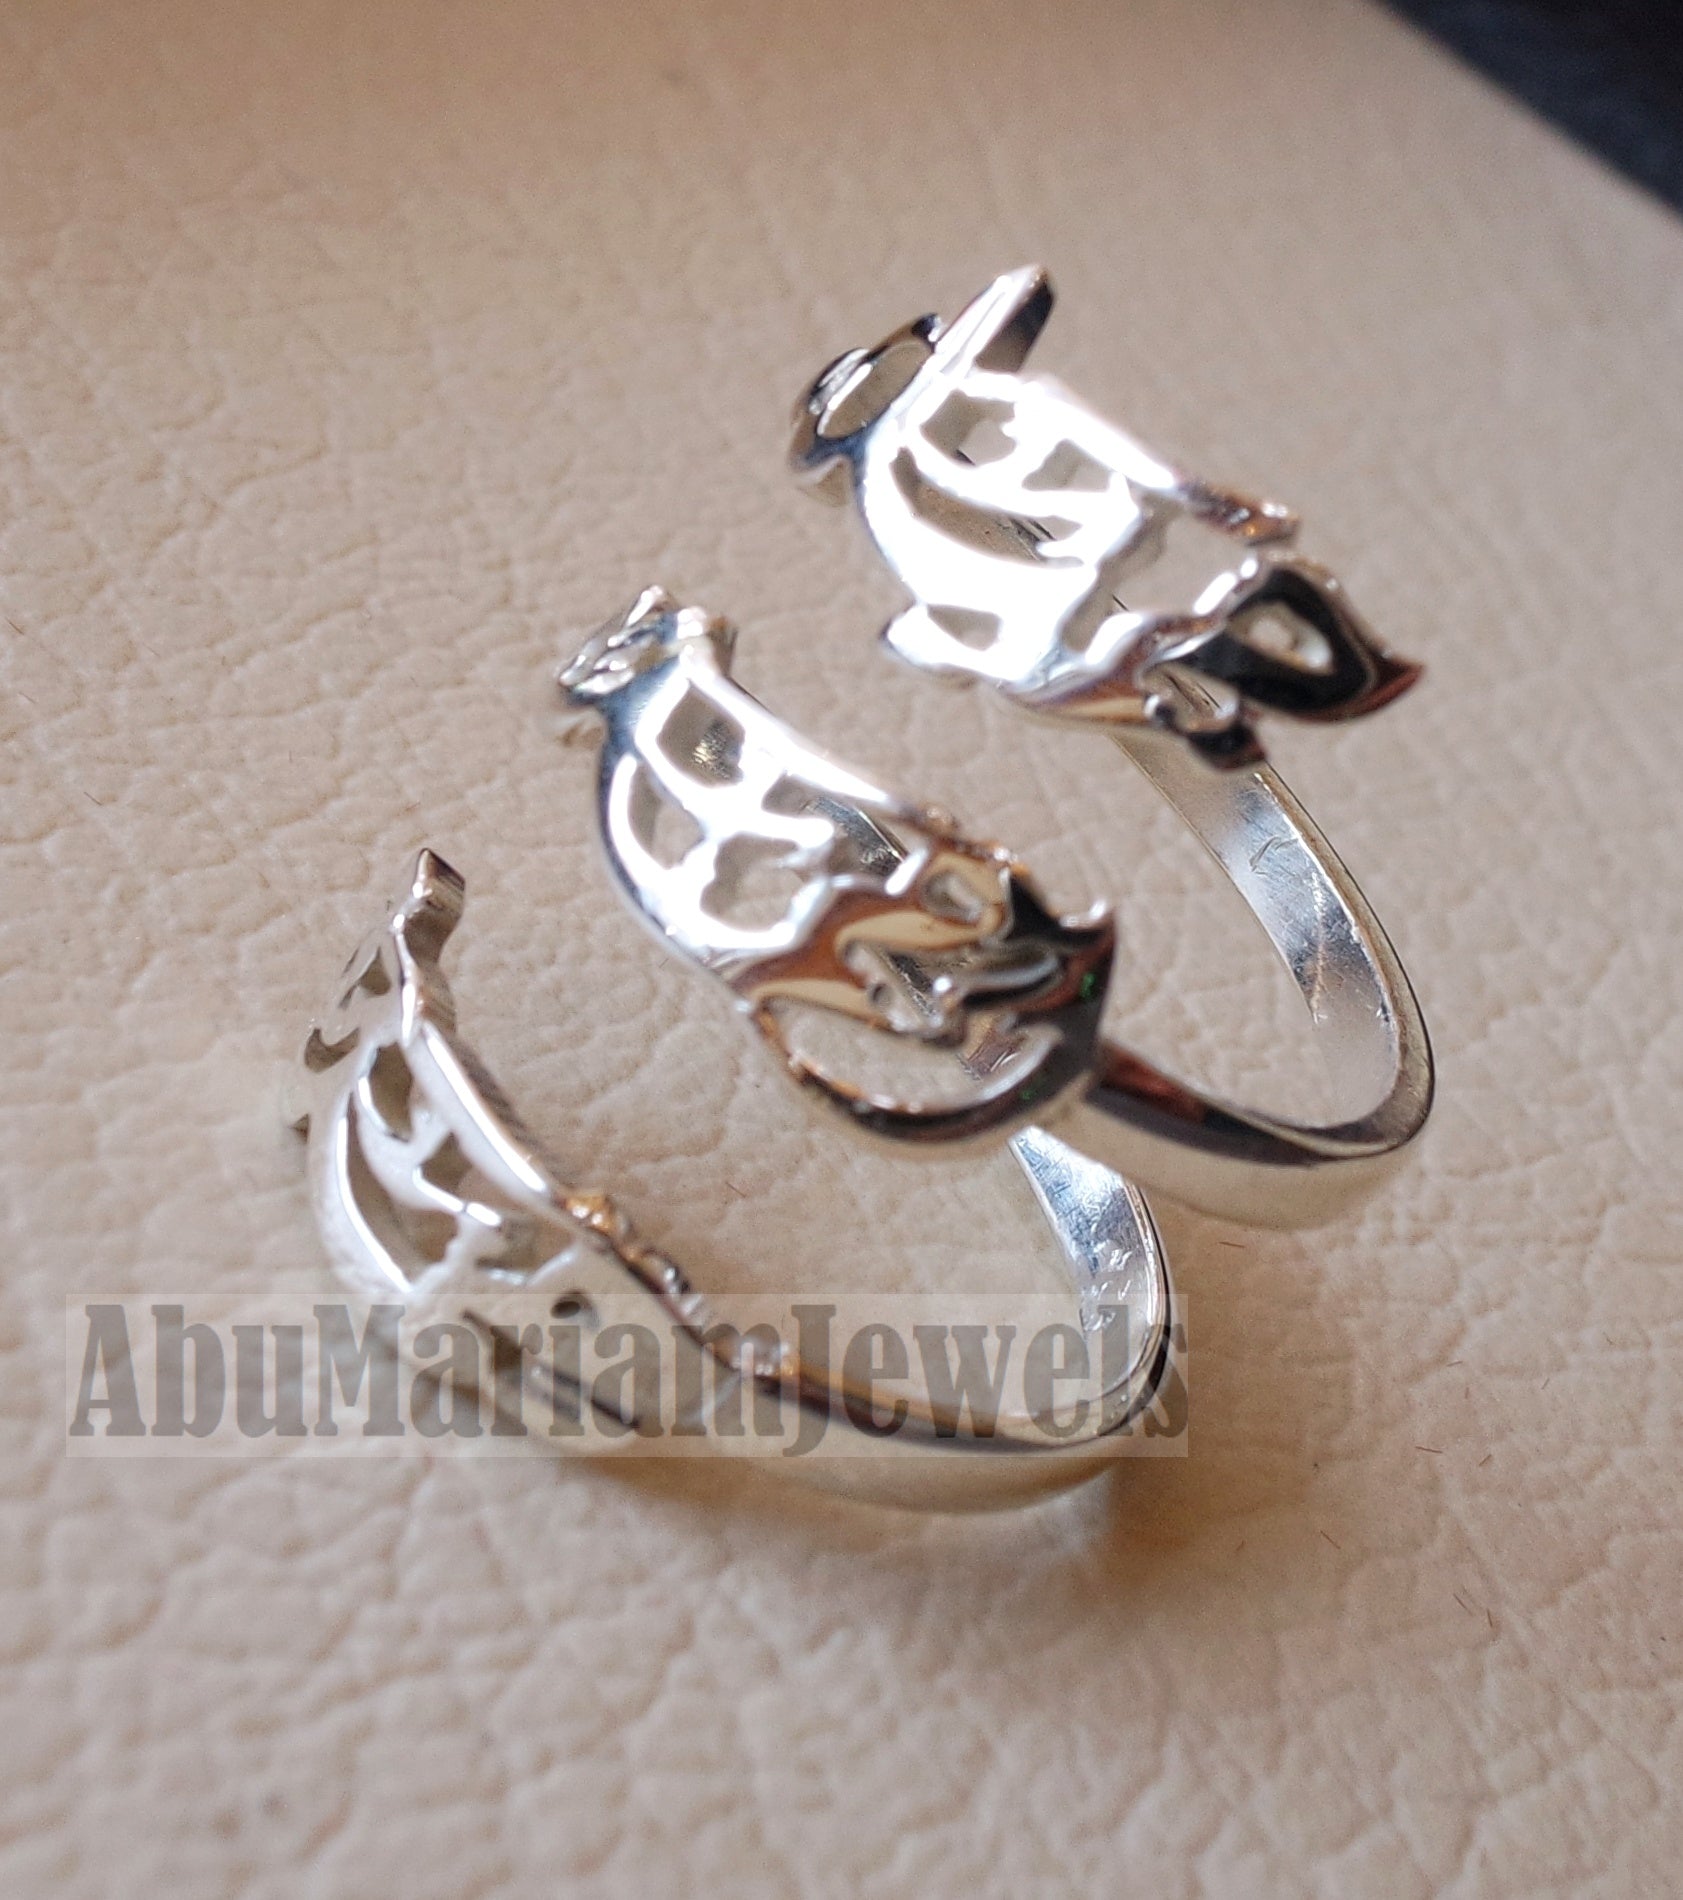 Arabic calligraphy customized 3 names sterling silver 925 or 18 k yellow gold ring fit all sizes any name RE1007 خاتم اسماء عربي